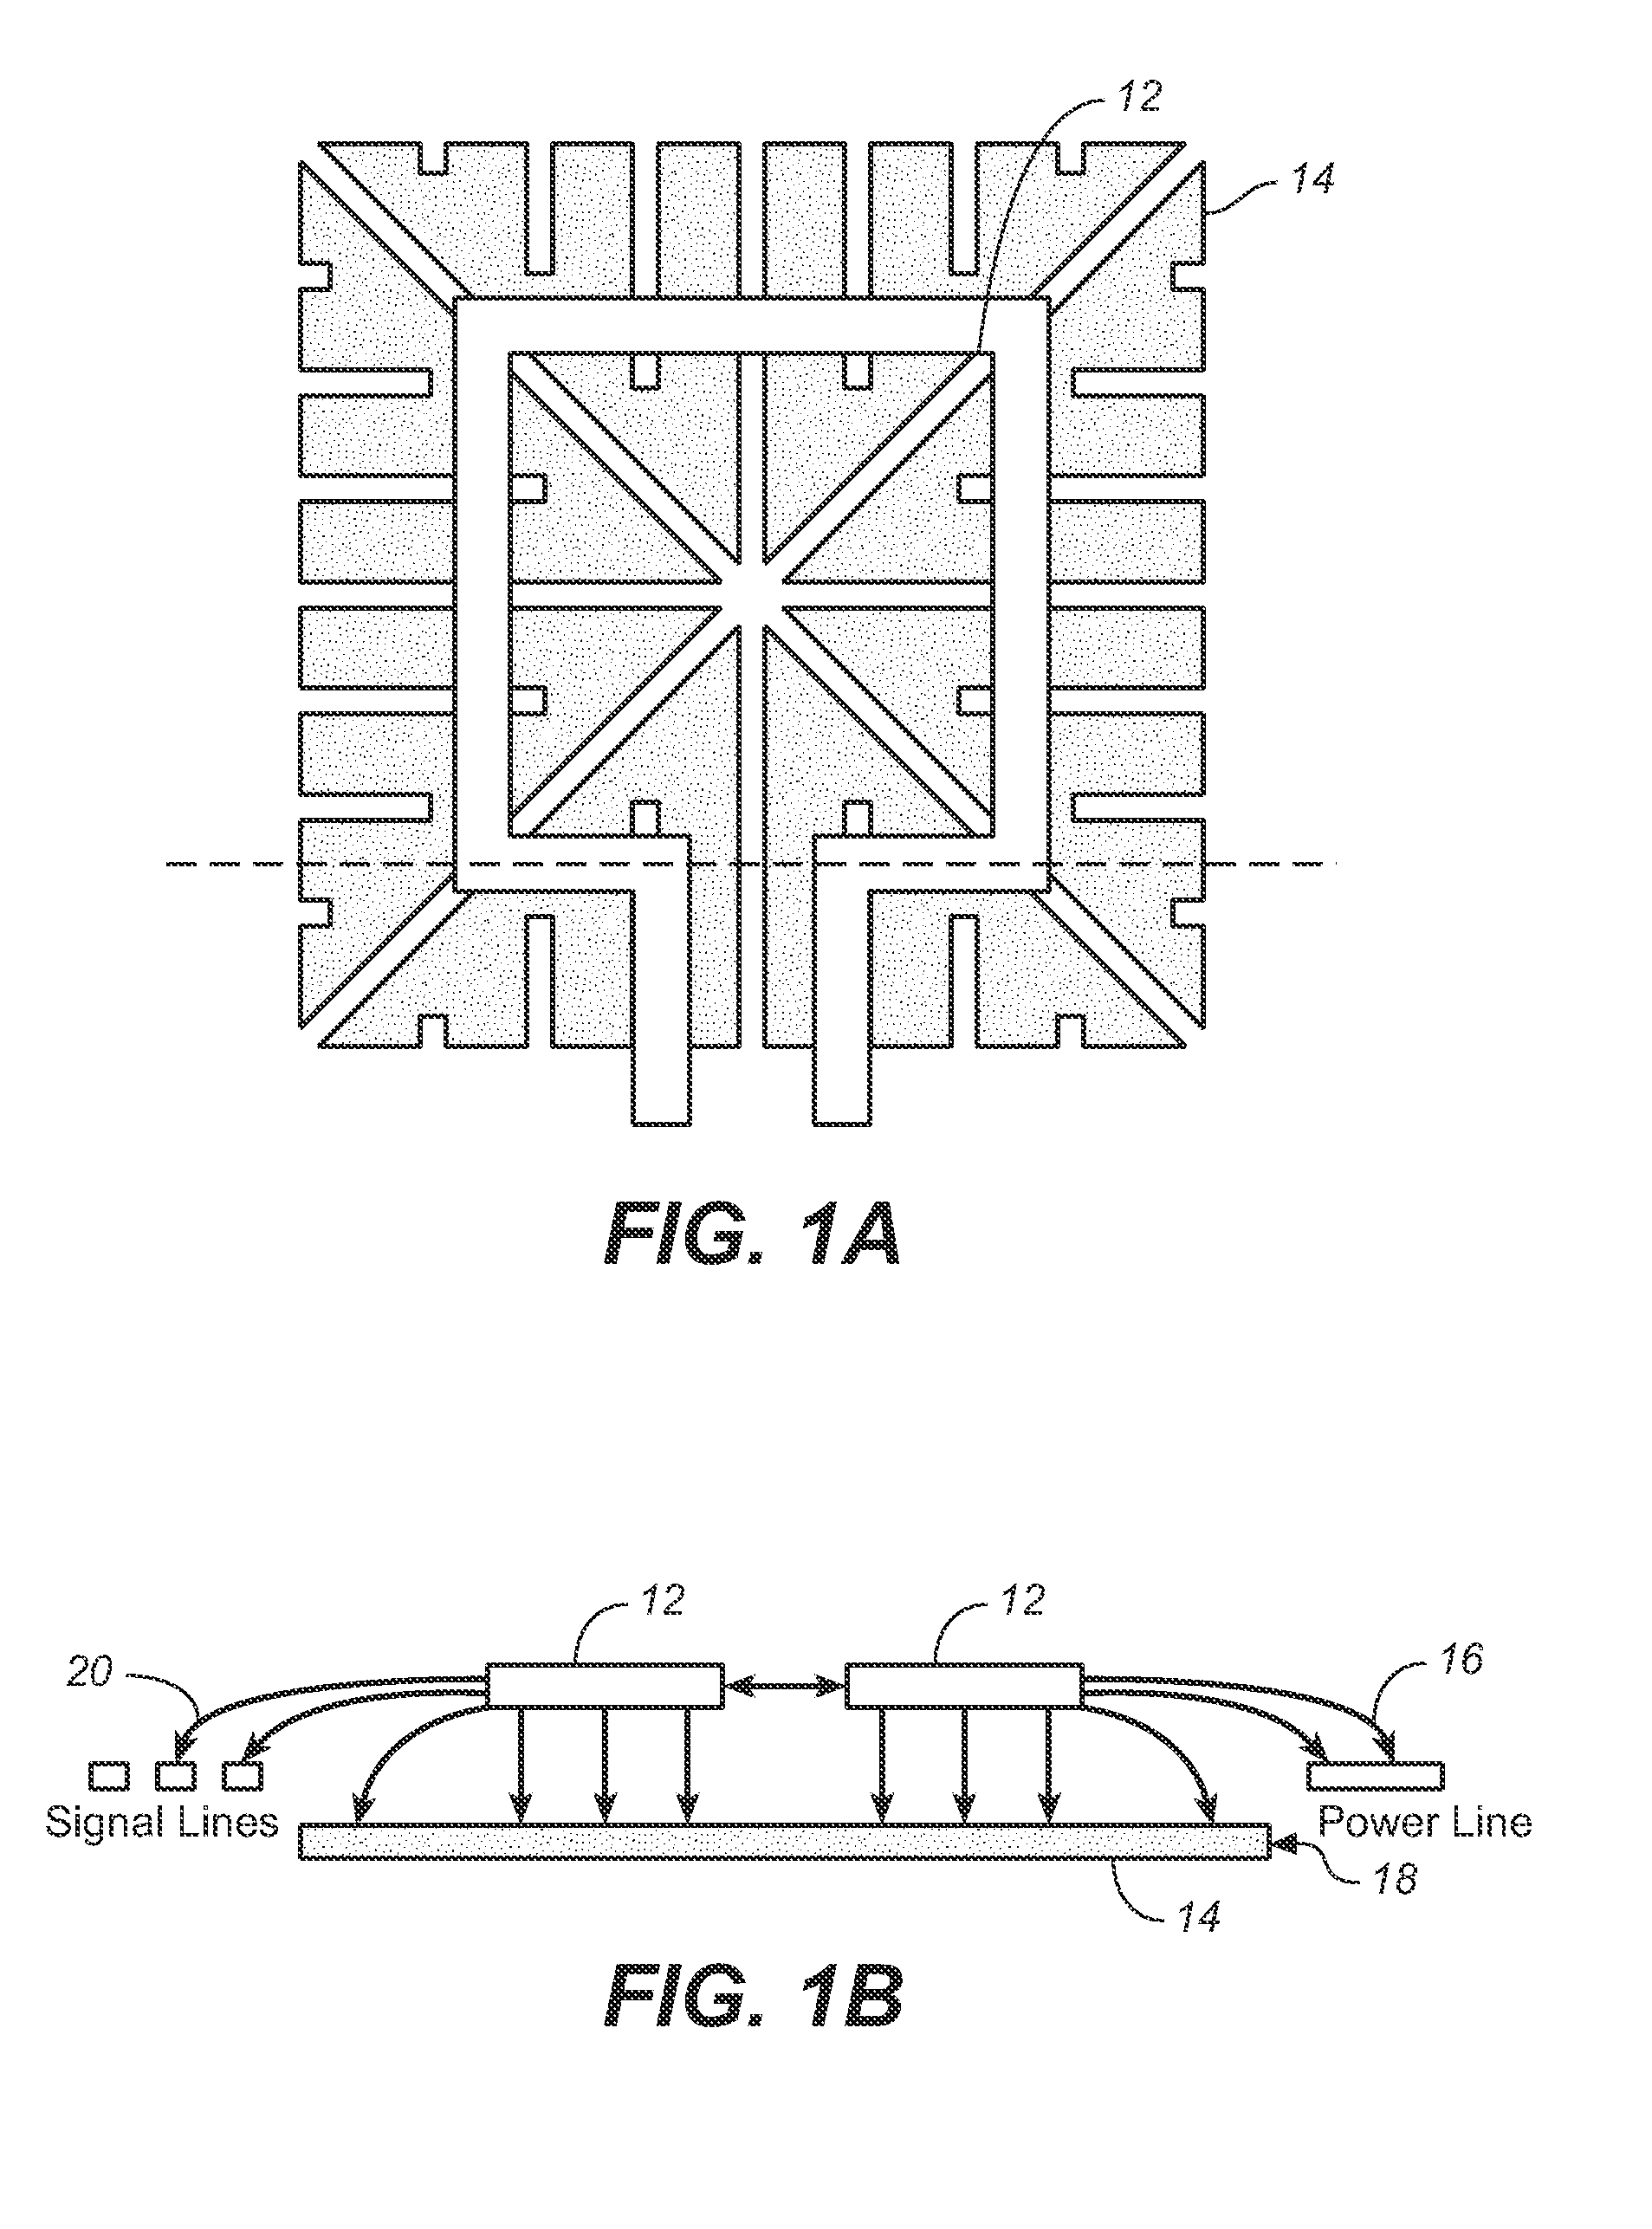 Sliced electromagnetic cage for inductors